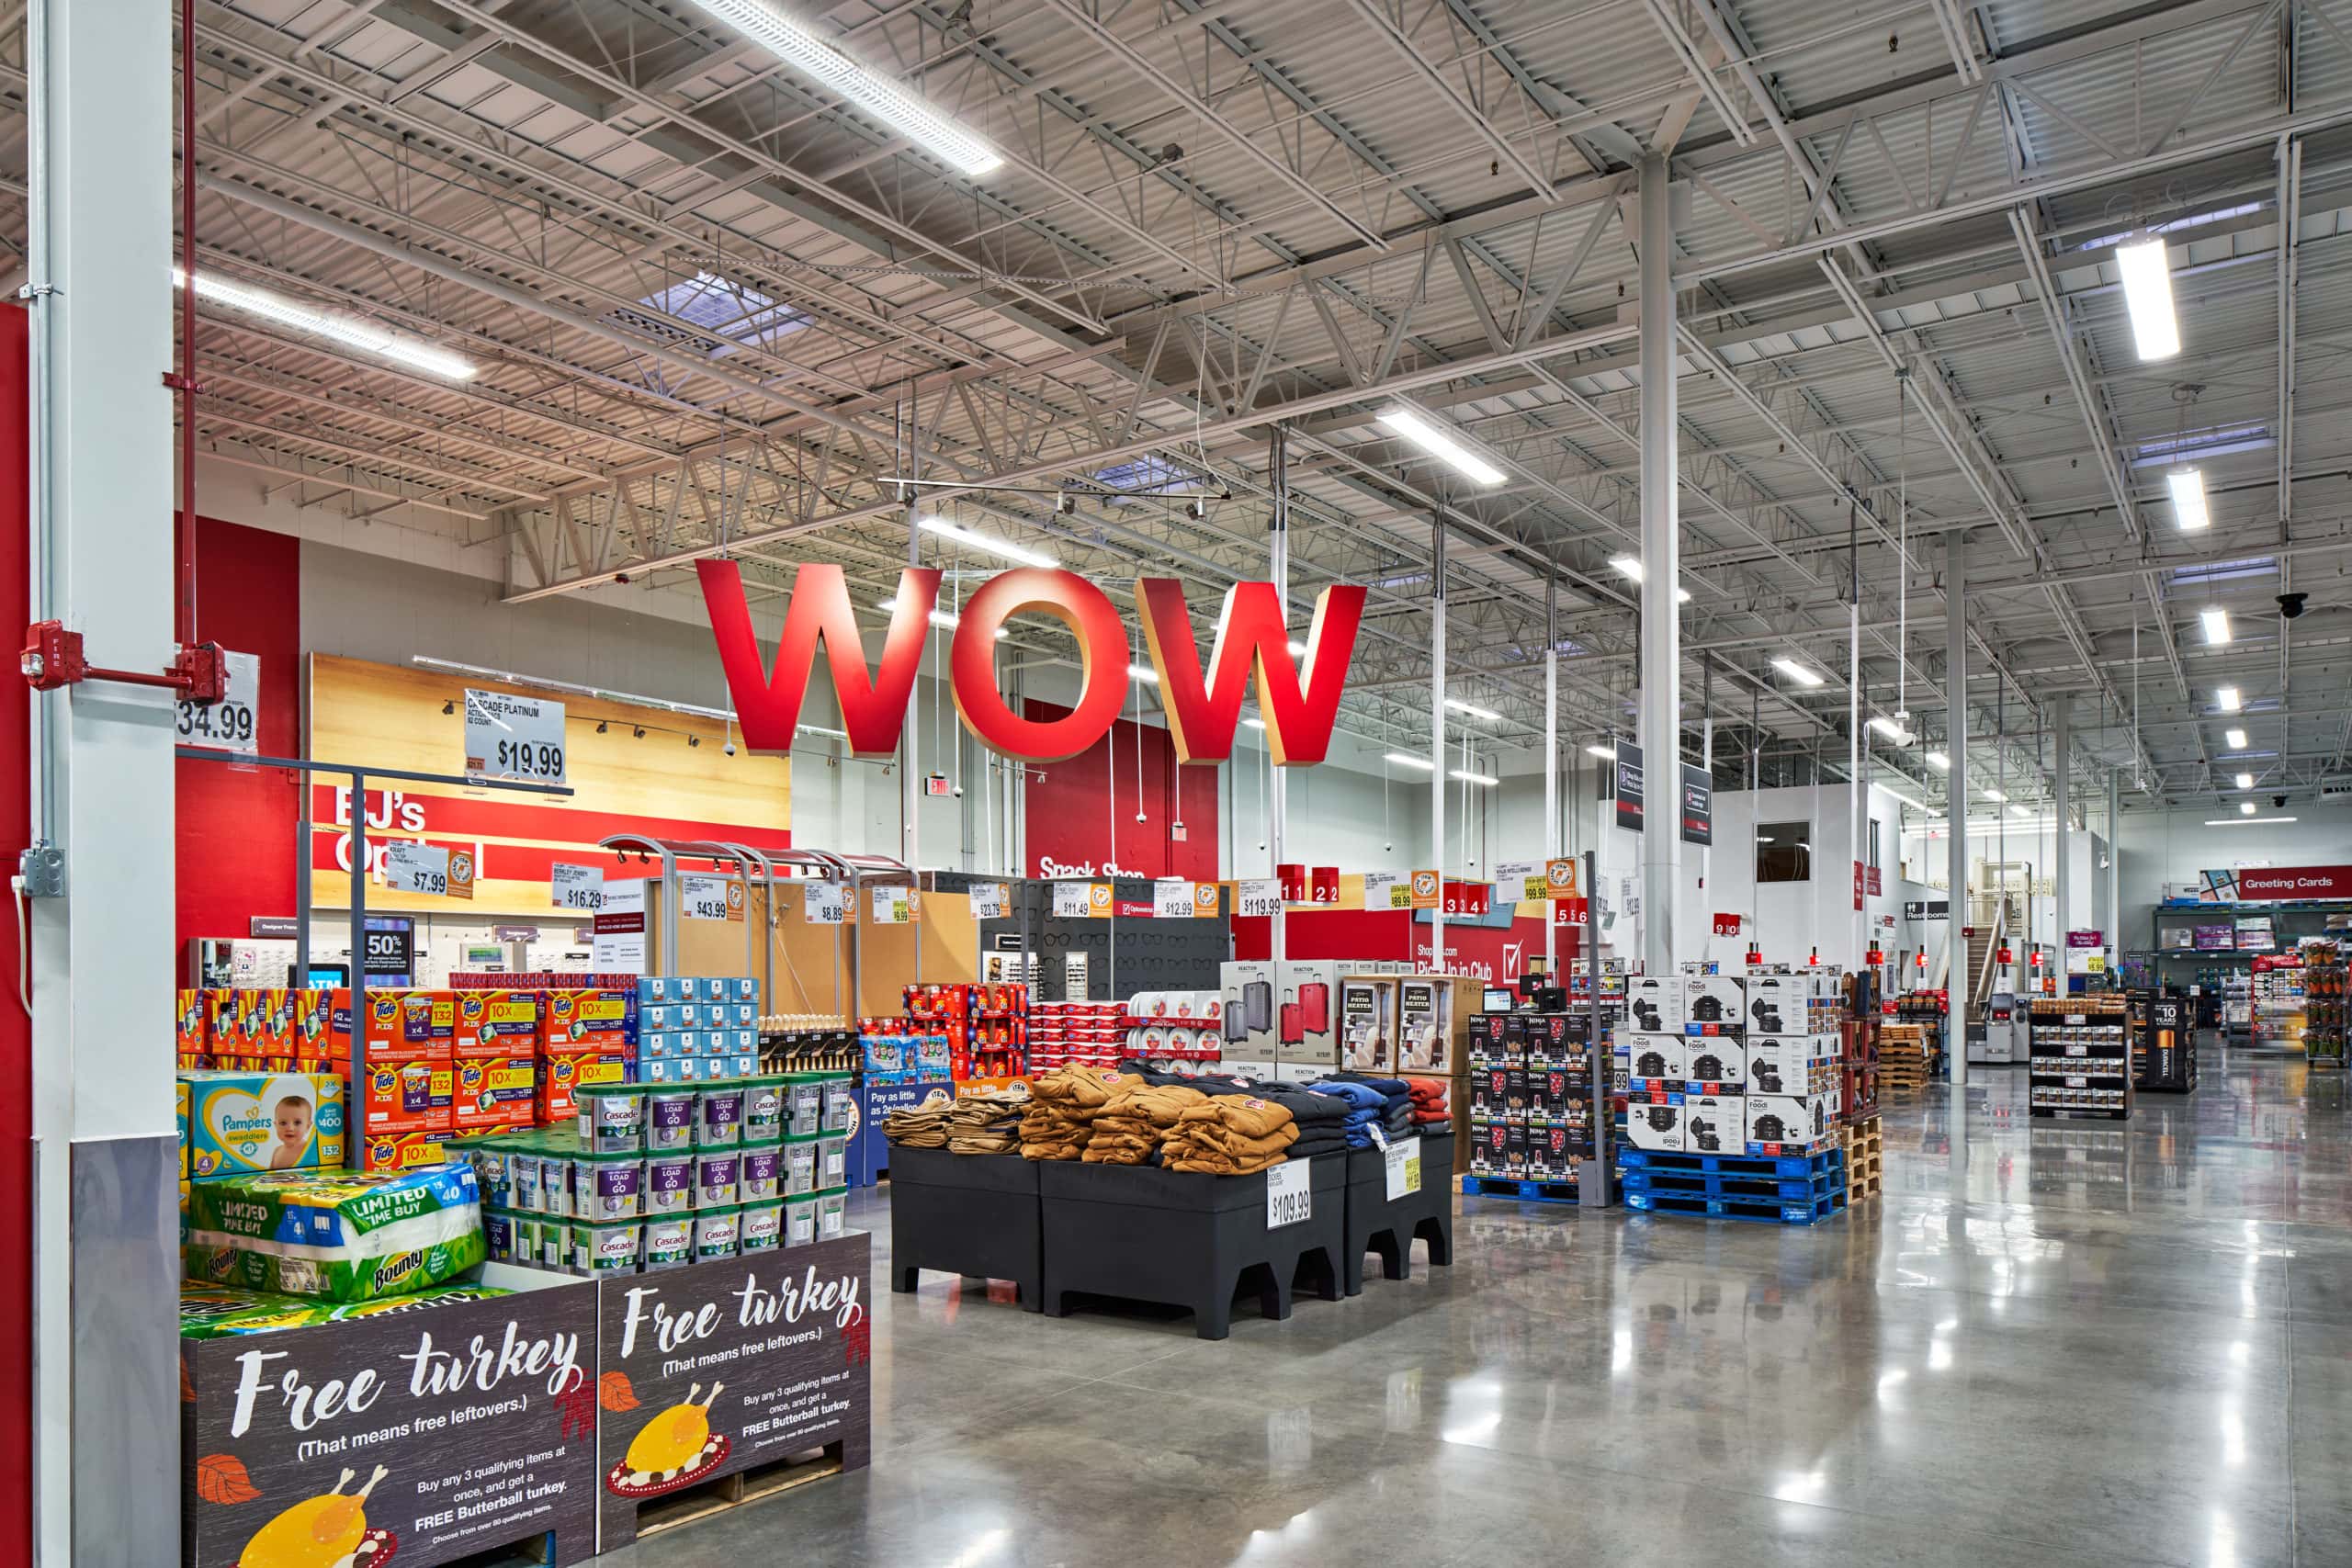 BJ's Wholesale Club - 3 Months Free Promo - wide 9